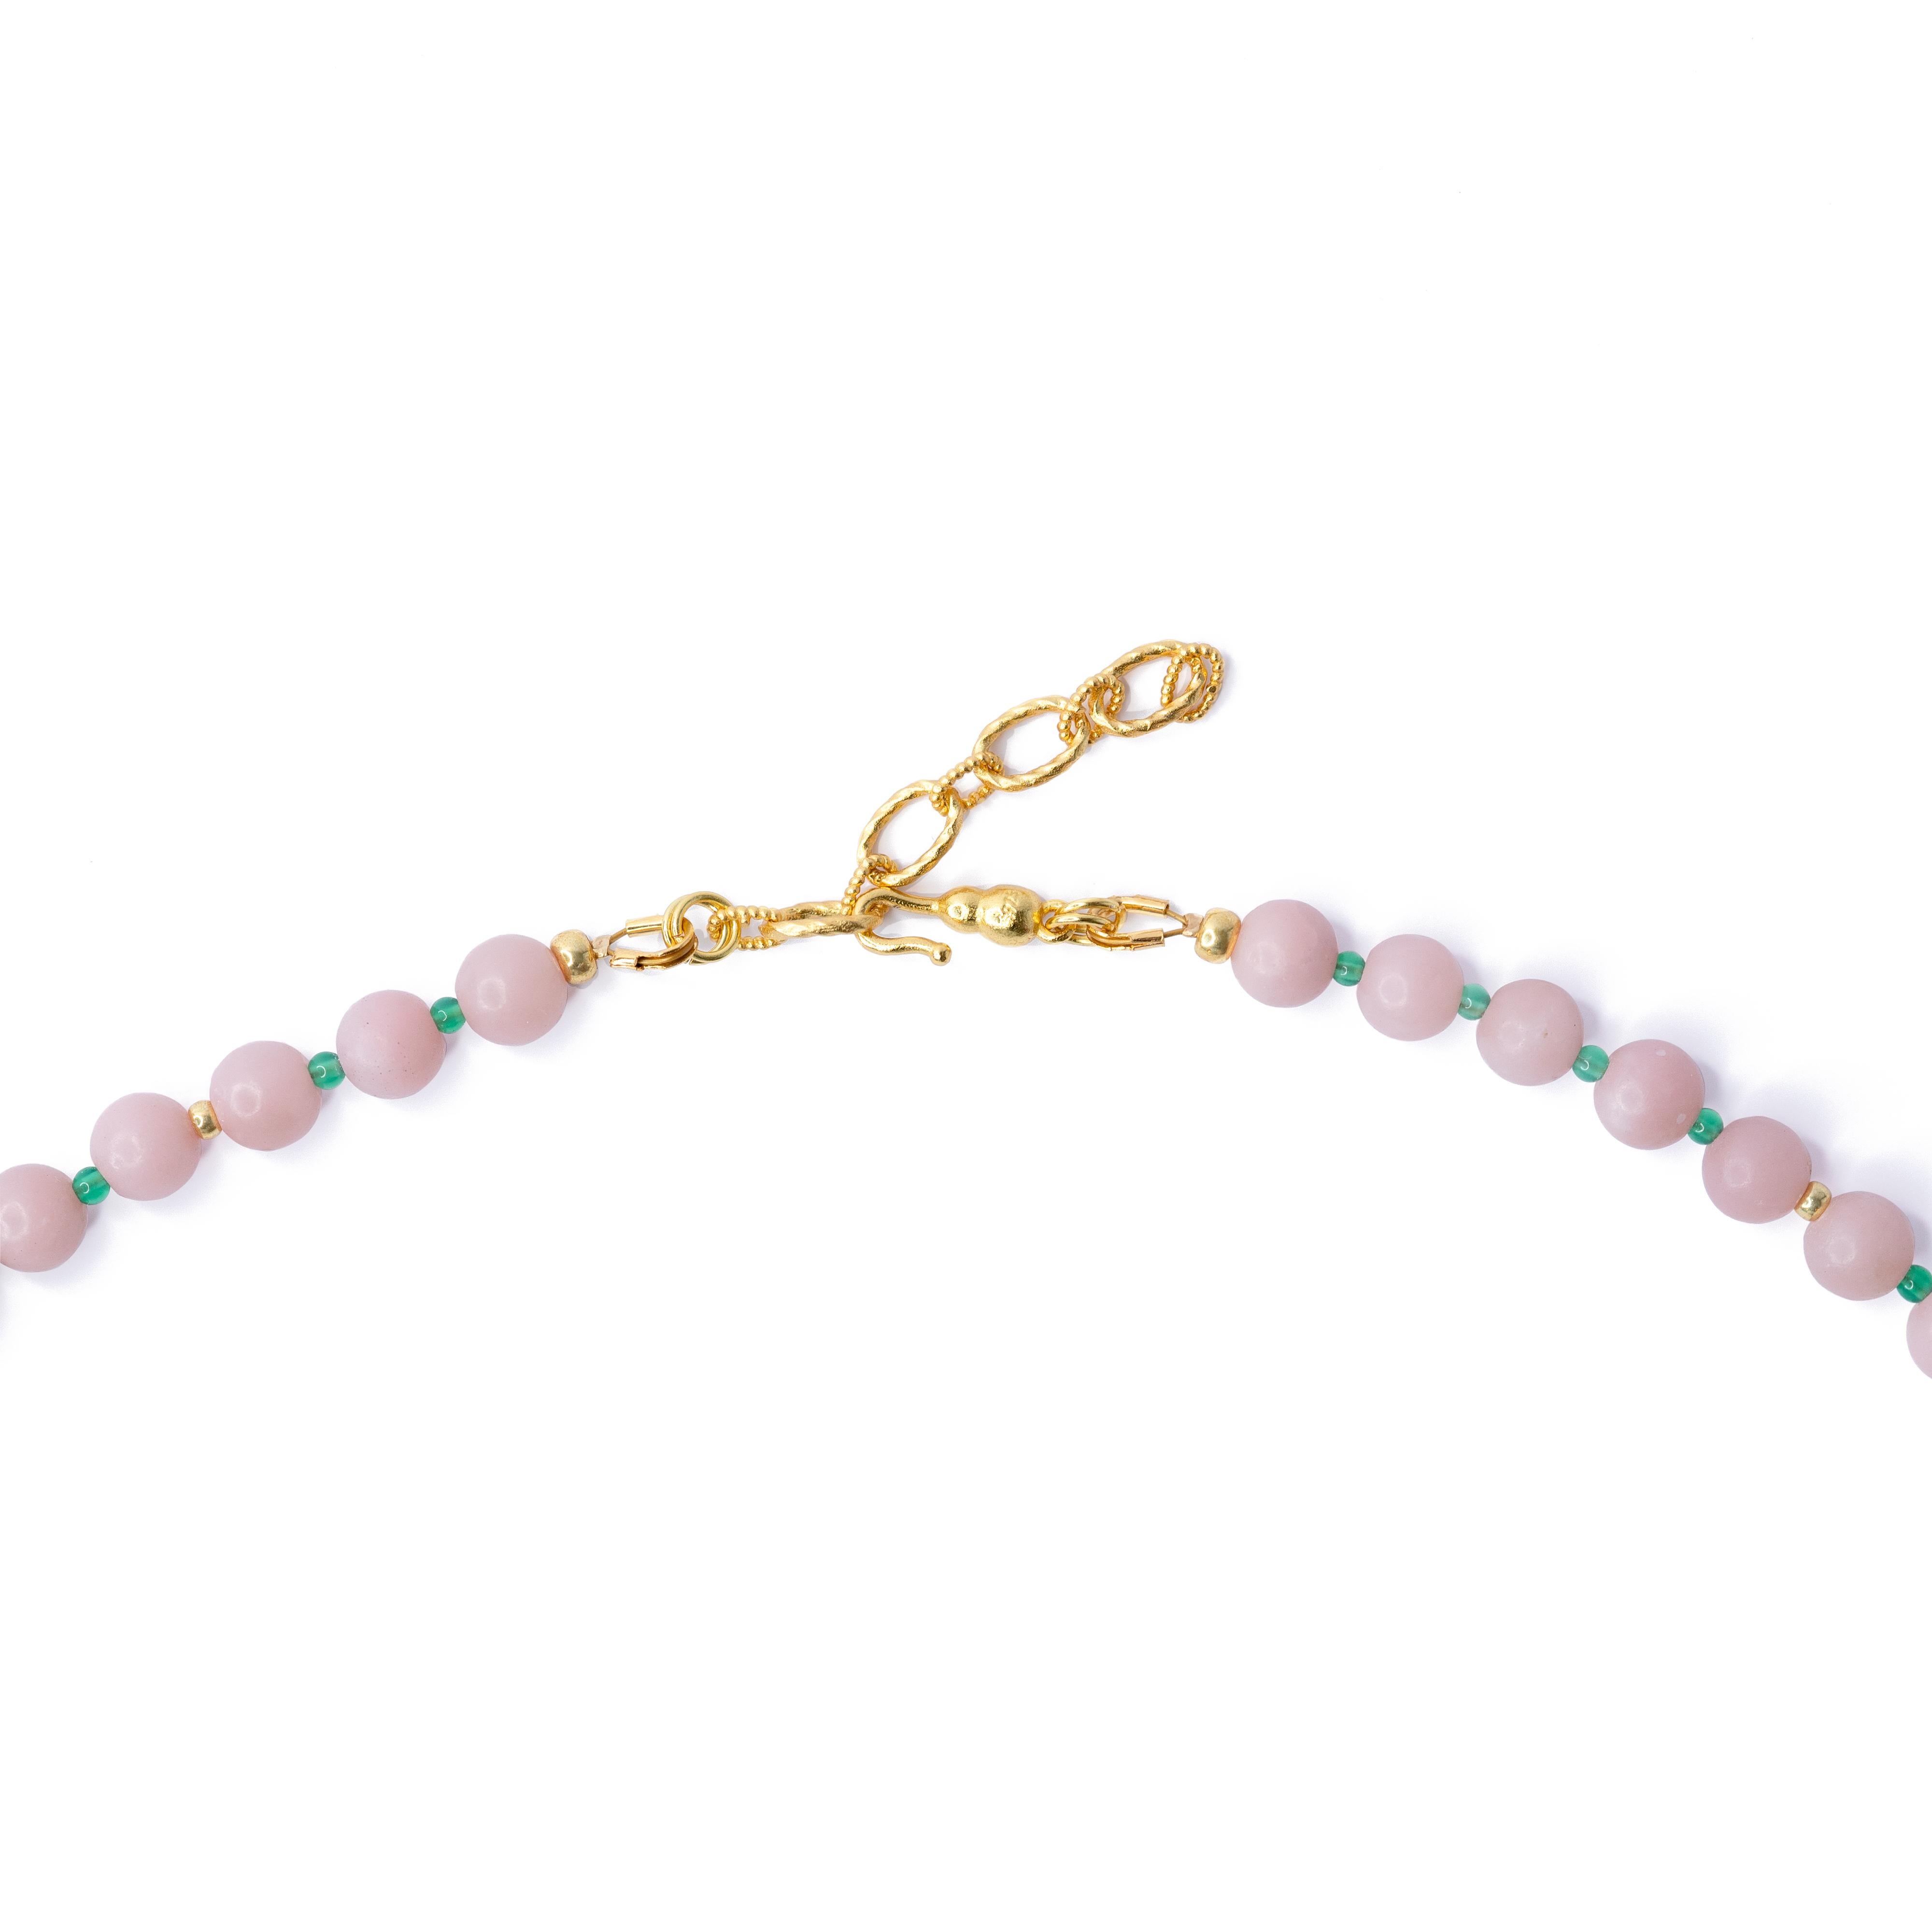 This necklace is crafted from Pink Peruvian Opal and Turquoise beads, finished with 22K Gold Plated Sterling Silver Adjustable hook.
	•	20